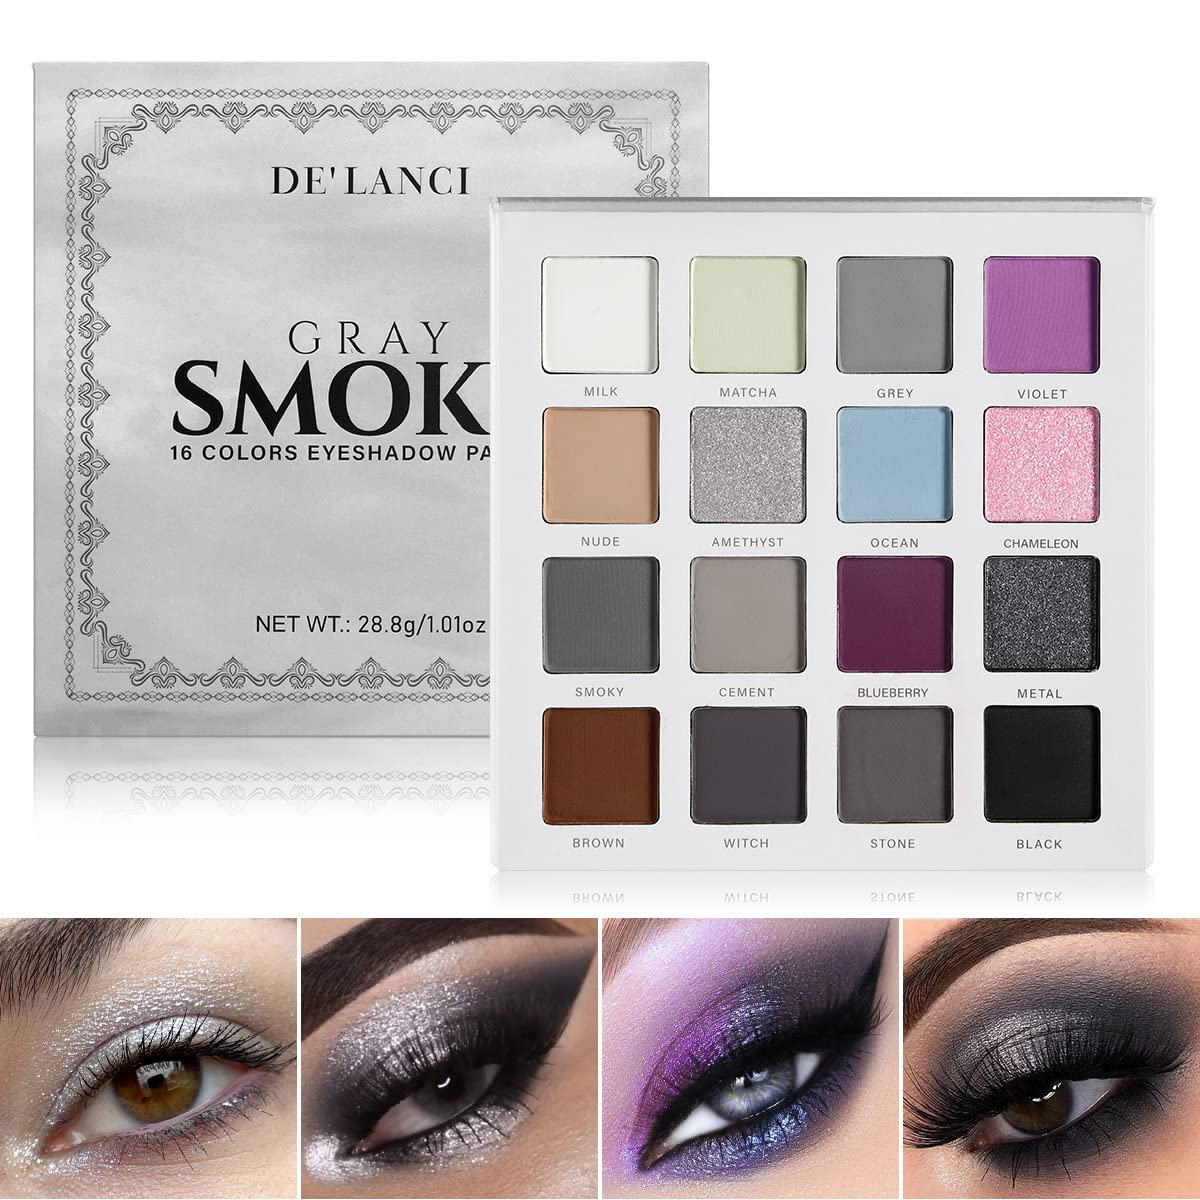 The Best Eye Shadow Palettes for a Perfect Smoky Eye